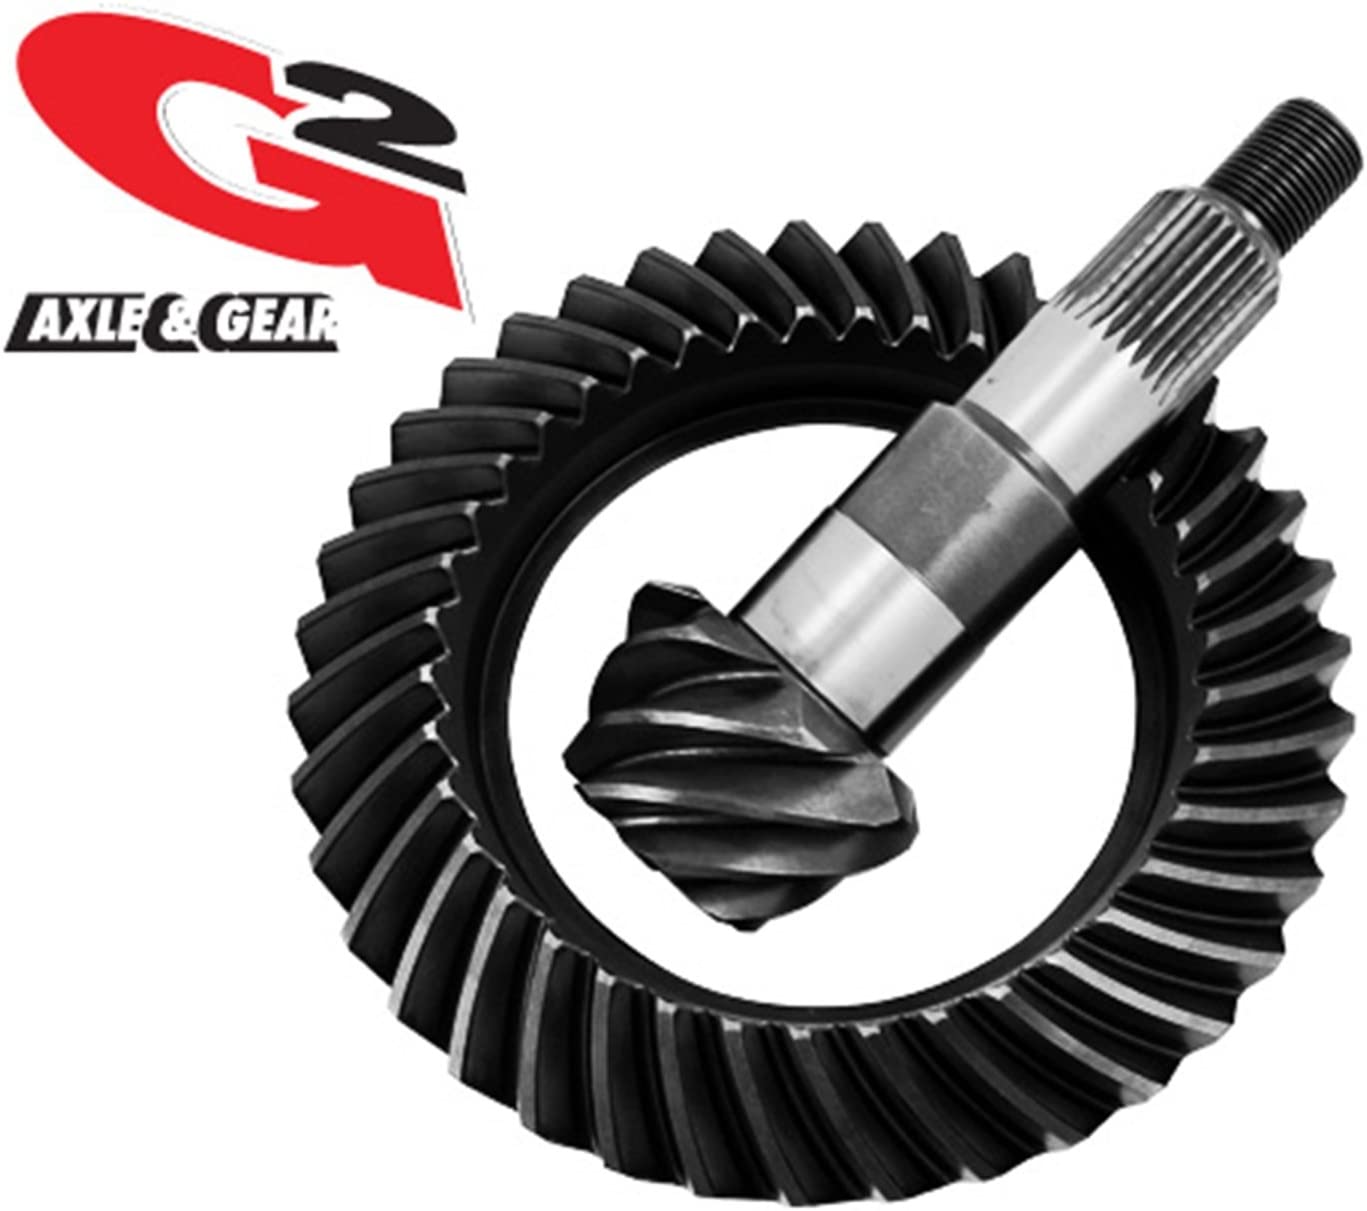 G2 Axle and Gear 2-2050-456R Ring and Pinion Set Dana 30 4.56 Ratio Ring and Pinion Set